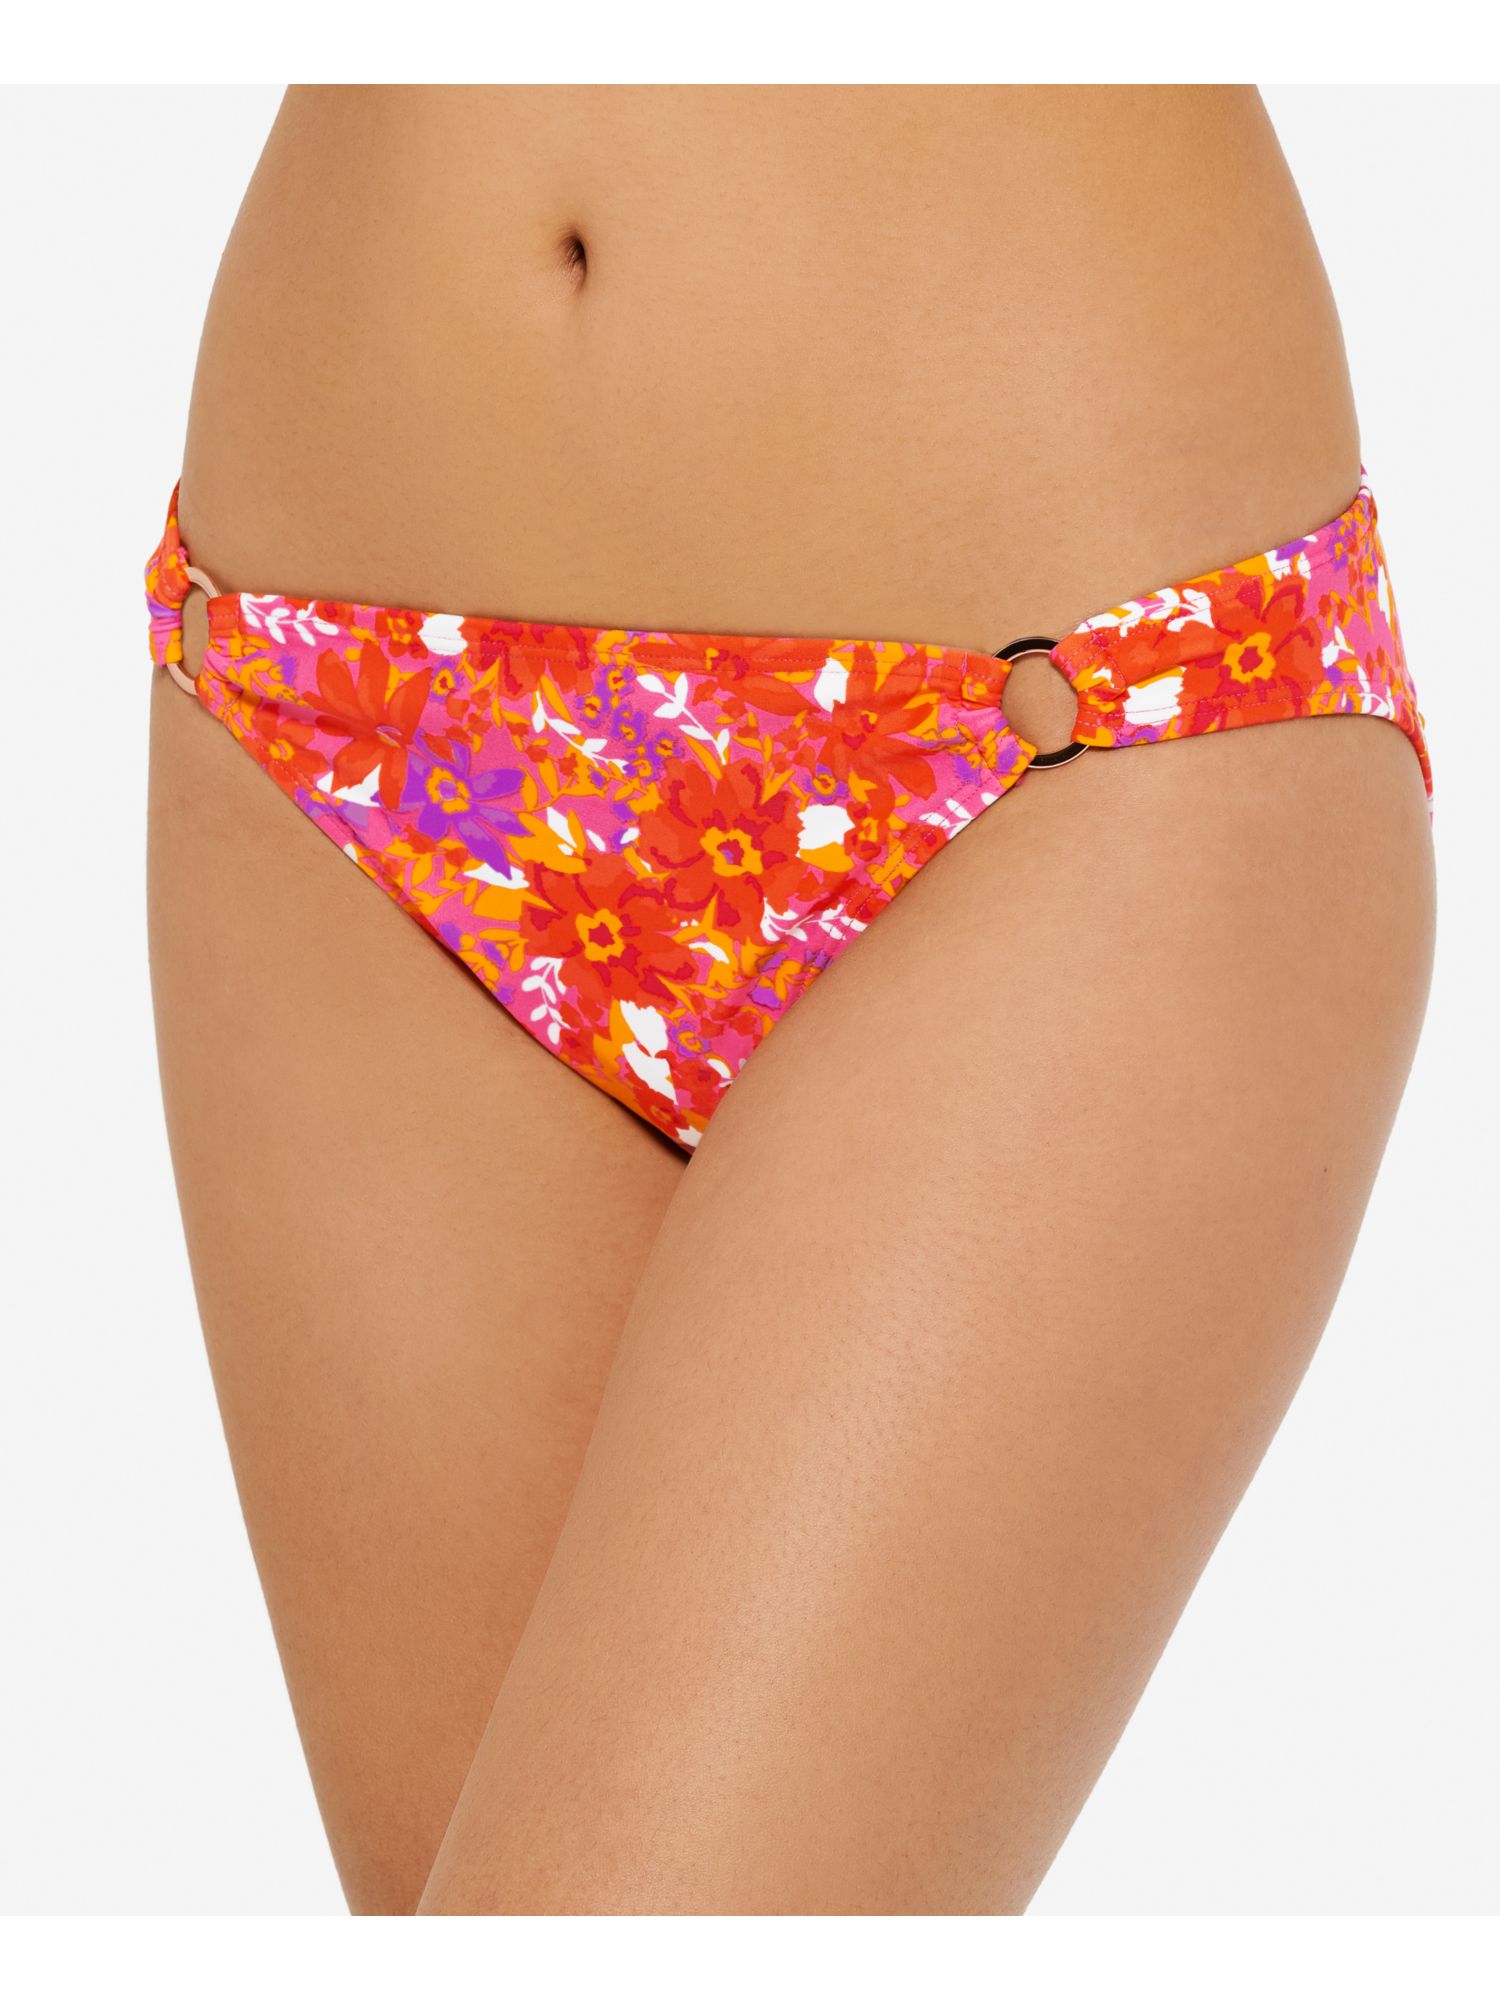 HULA HONEY Women's Orange Floral Ring Detail Lined Bold Bouquet Hipster Swimsuit Bottom XS